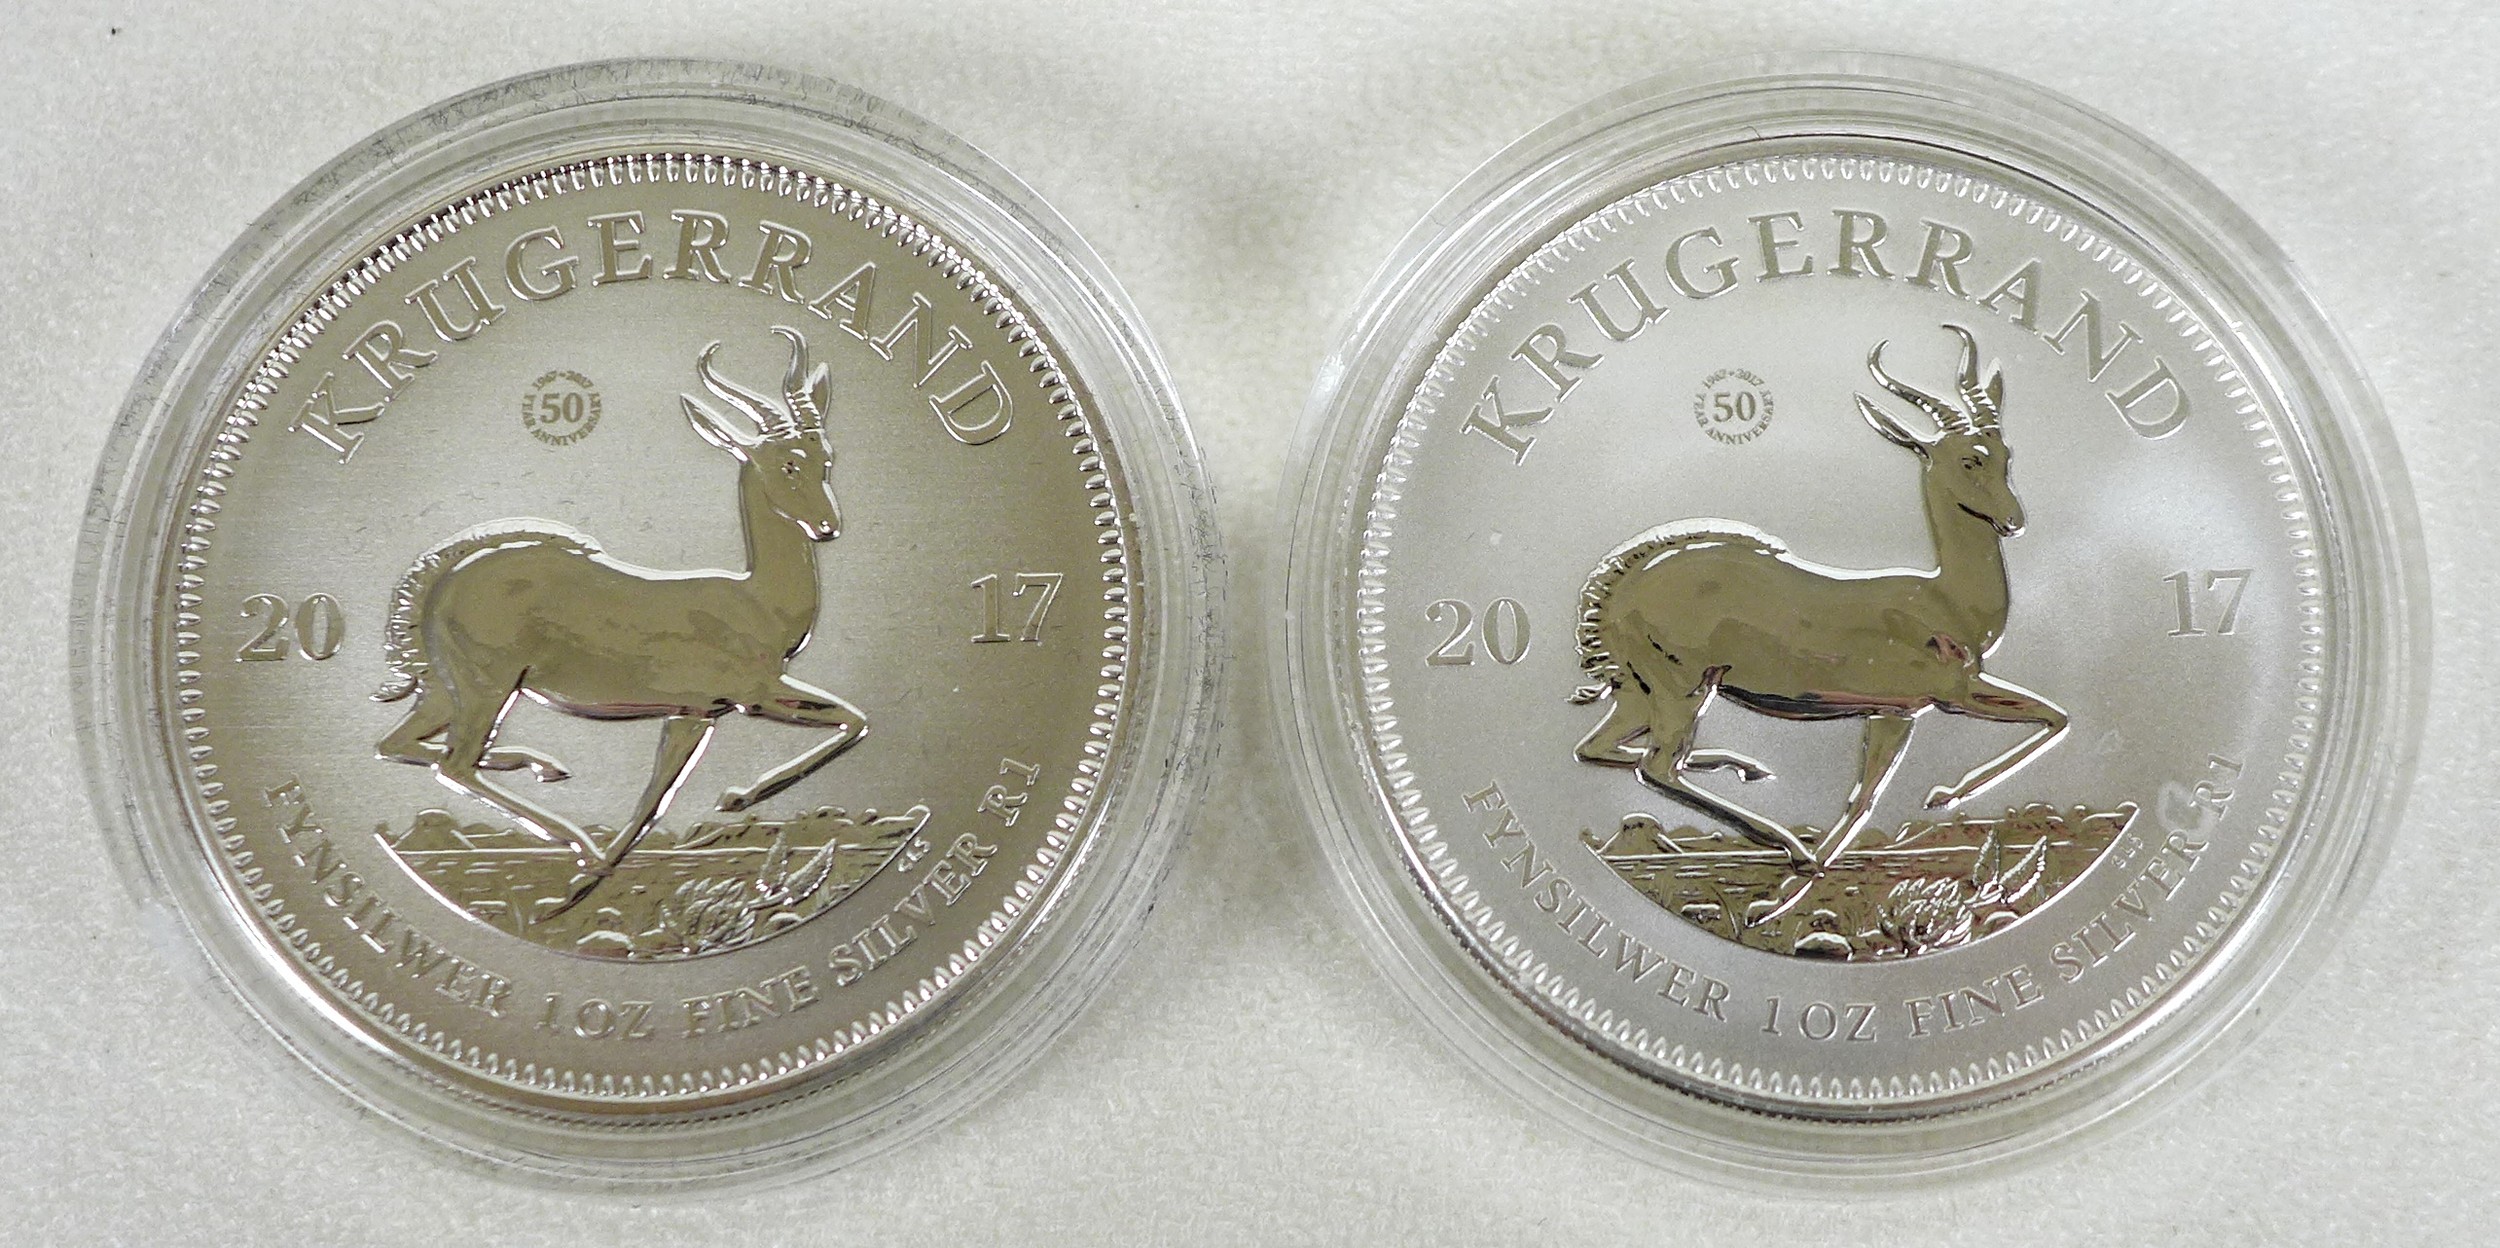 Three South Africa Mint 2017 fine silver Krugerrands, comprising two premium uncirculated - Image 4 of 5